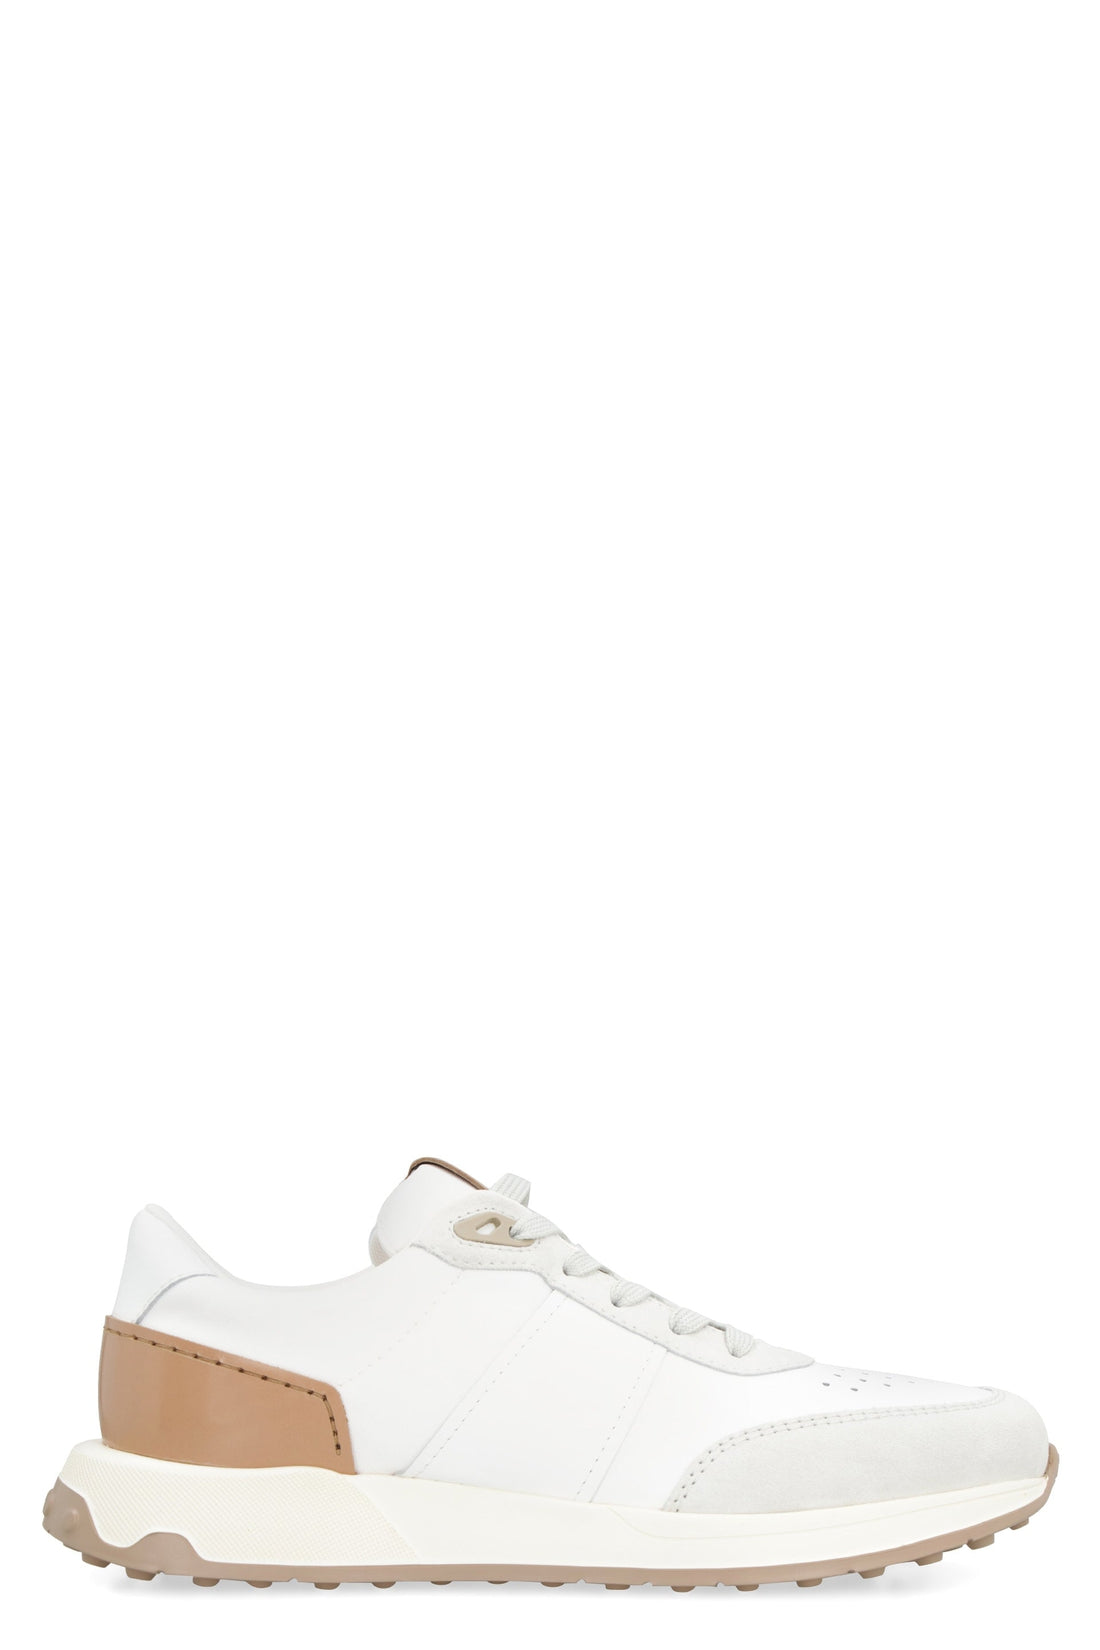 Tod's-OUTLET-SALE-Leather and fabric low-top sneakers-ARCHIVIST